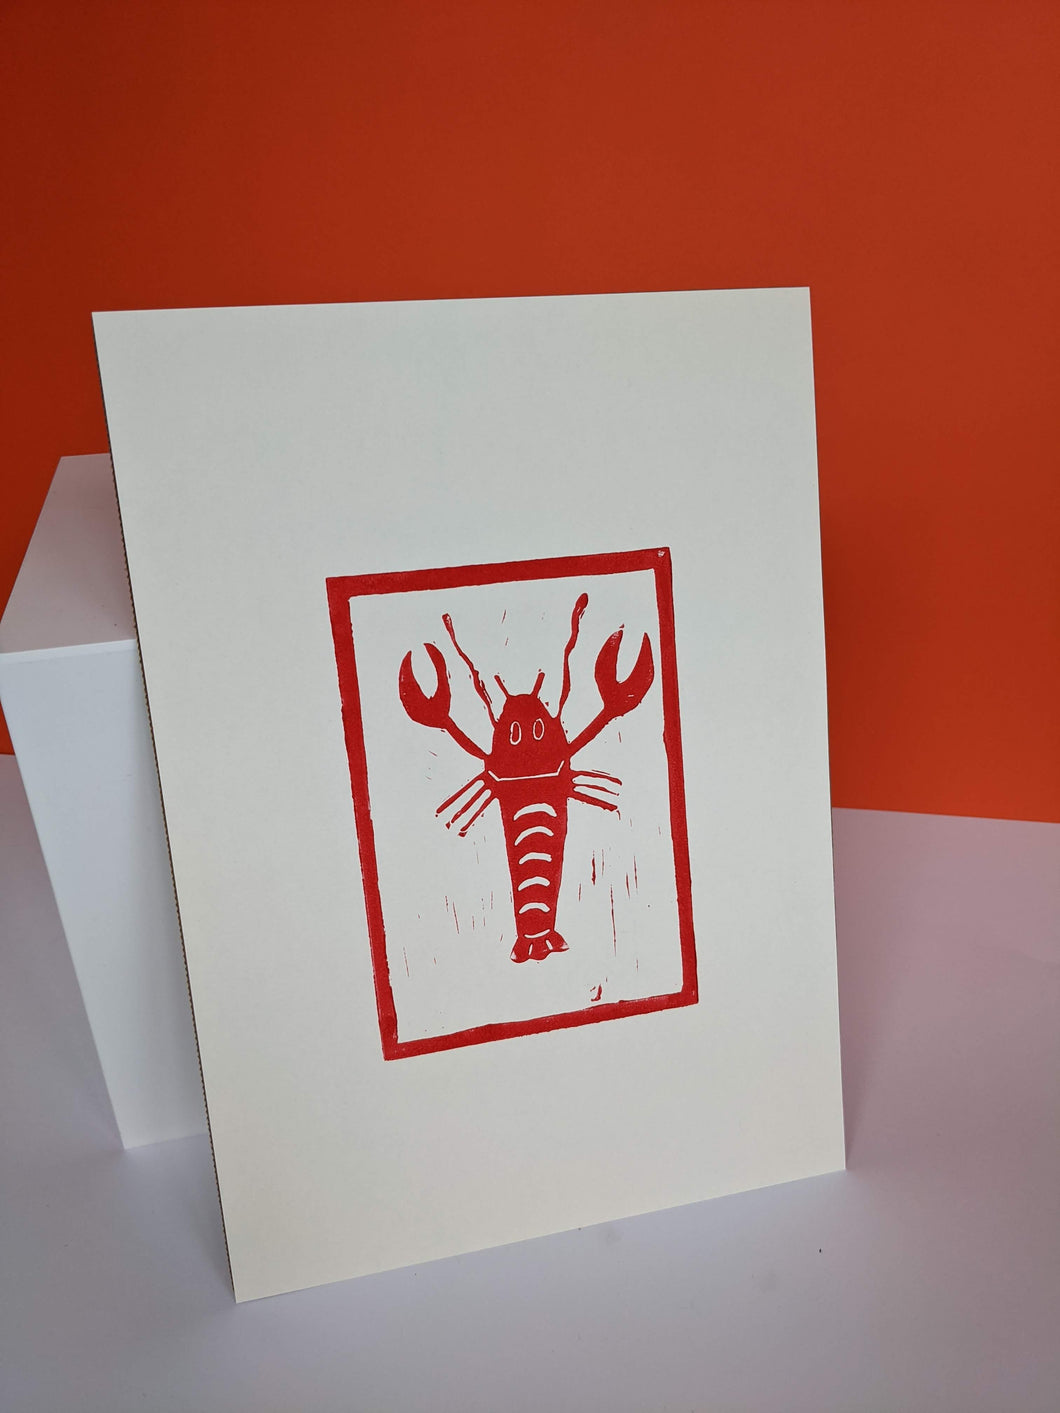 A red lobster print against an orange background